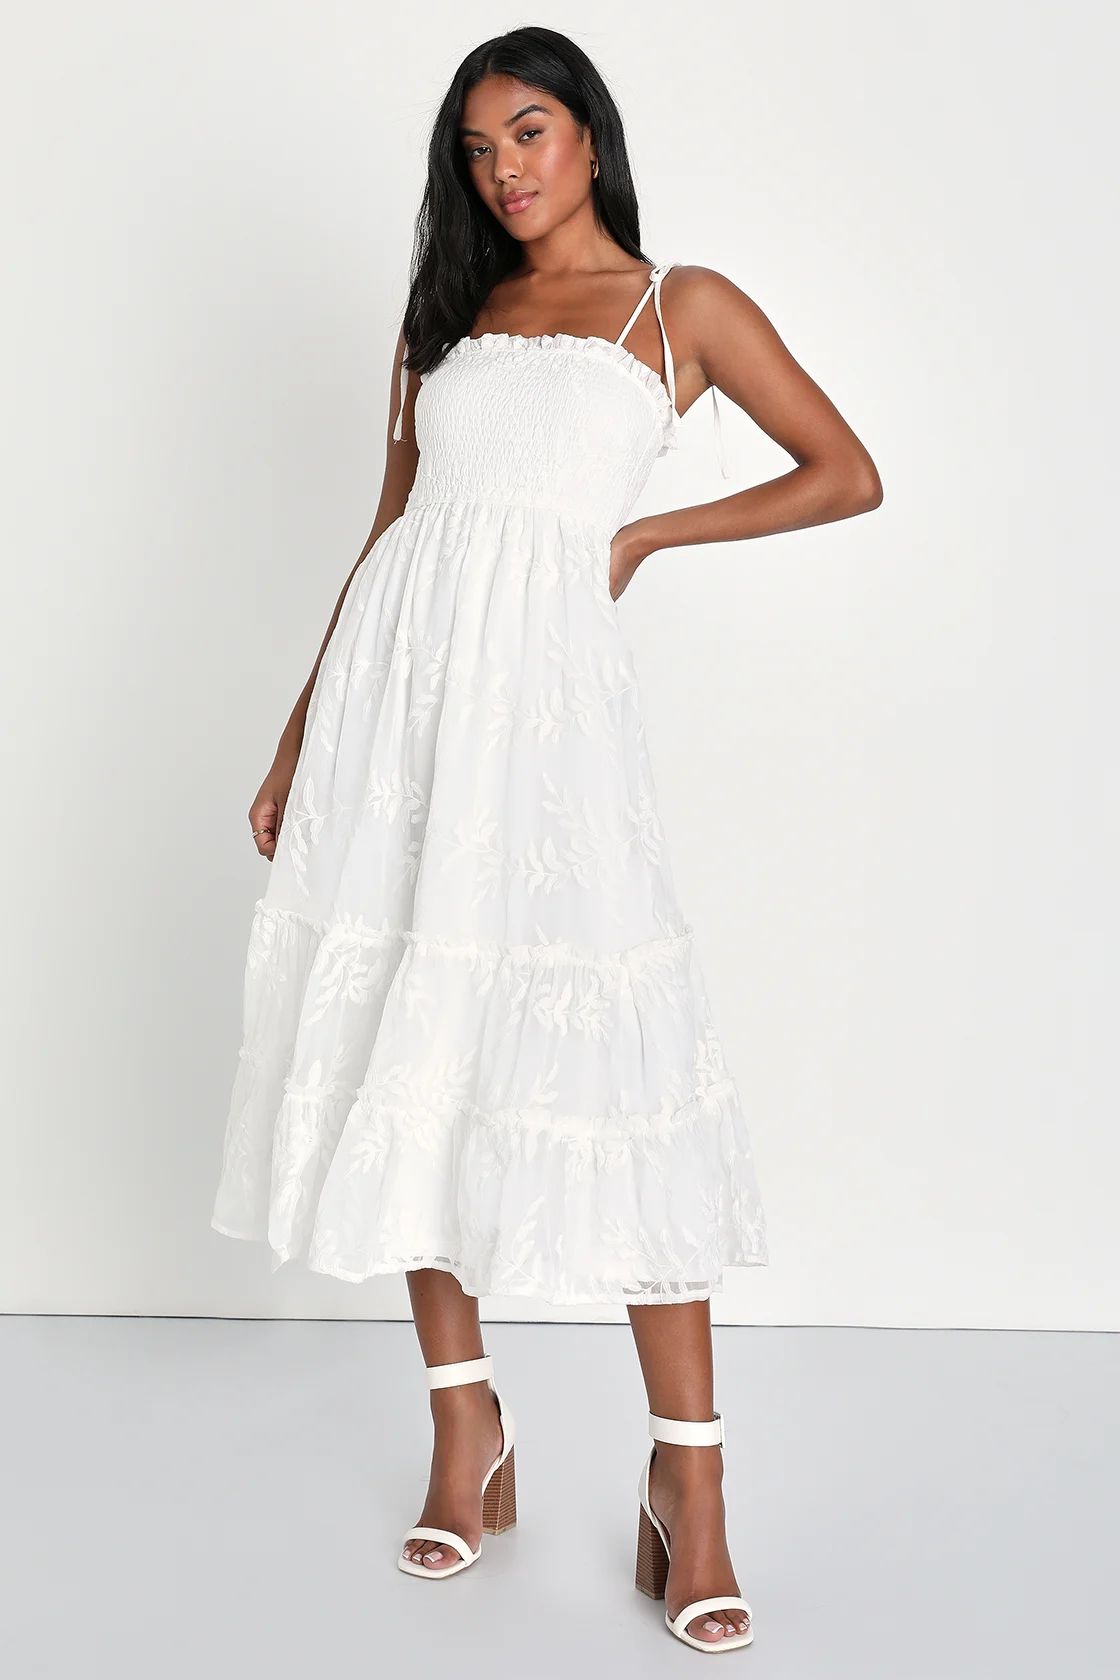 Signs of Love White Embroidered Smocked Tie-Strap Midi Dress | Lulus (US)